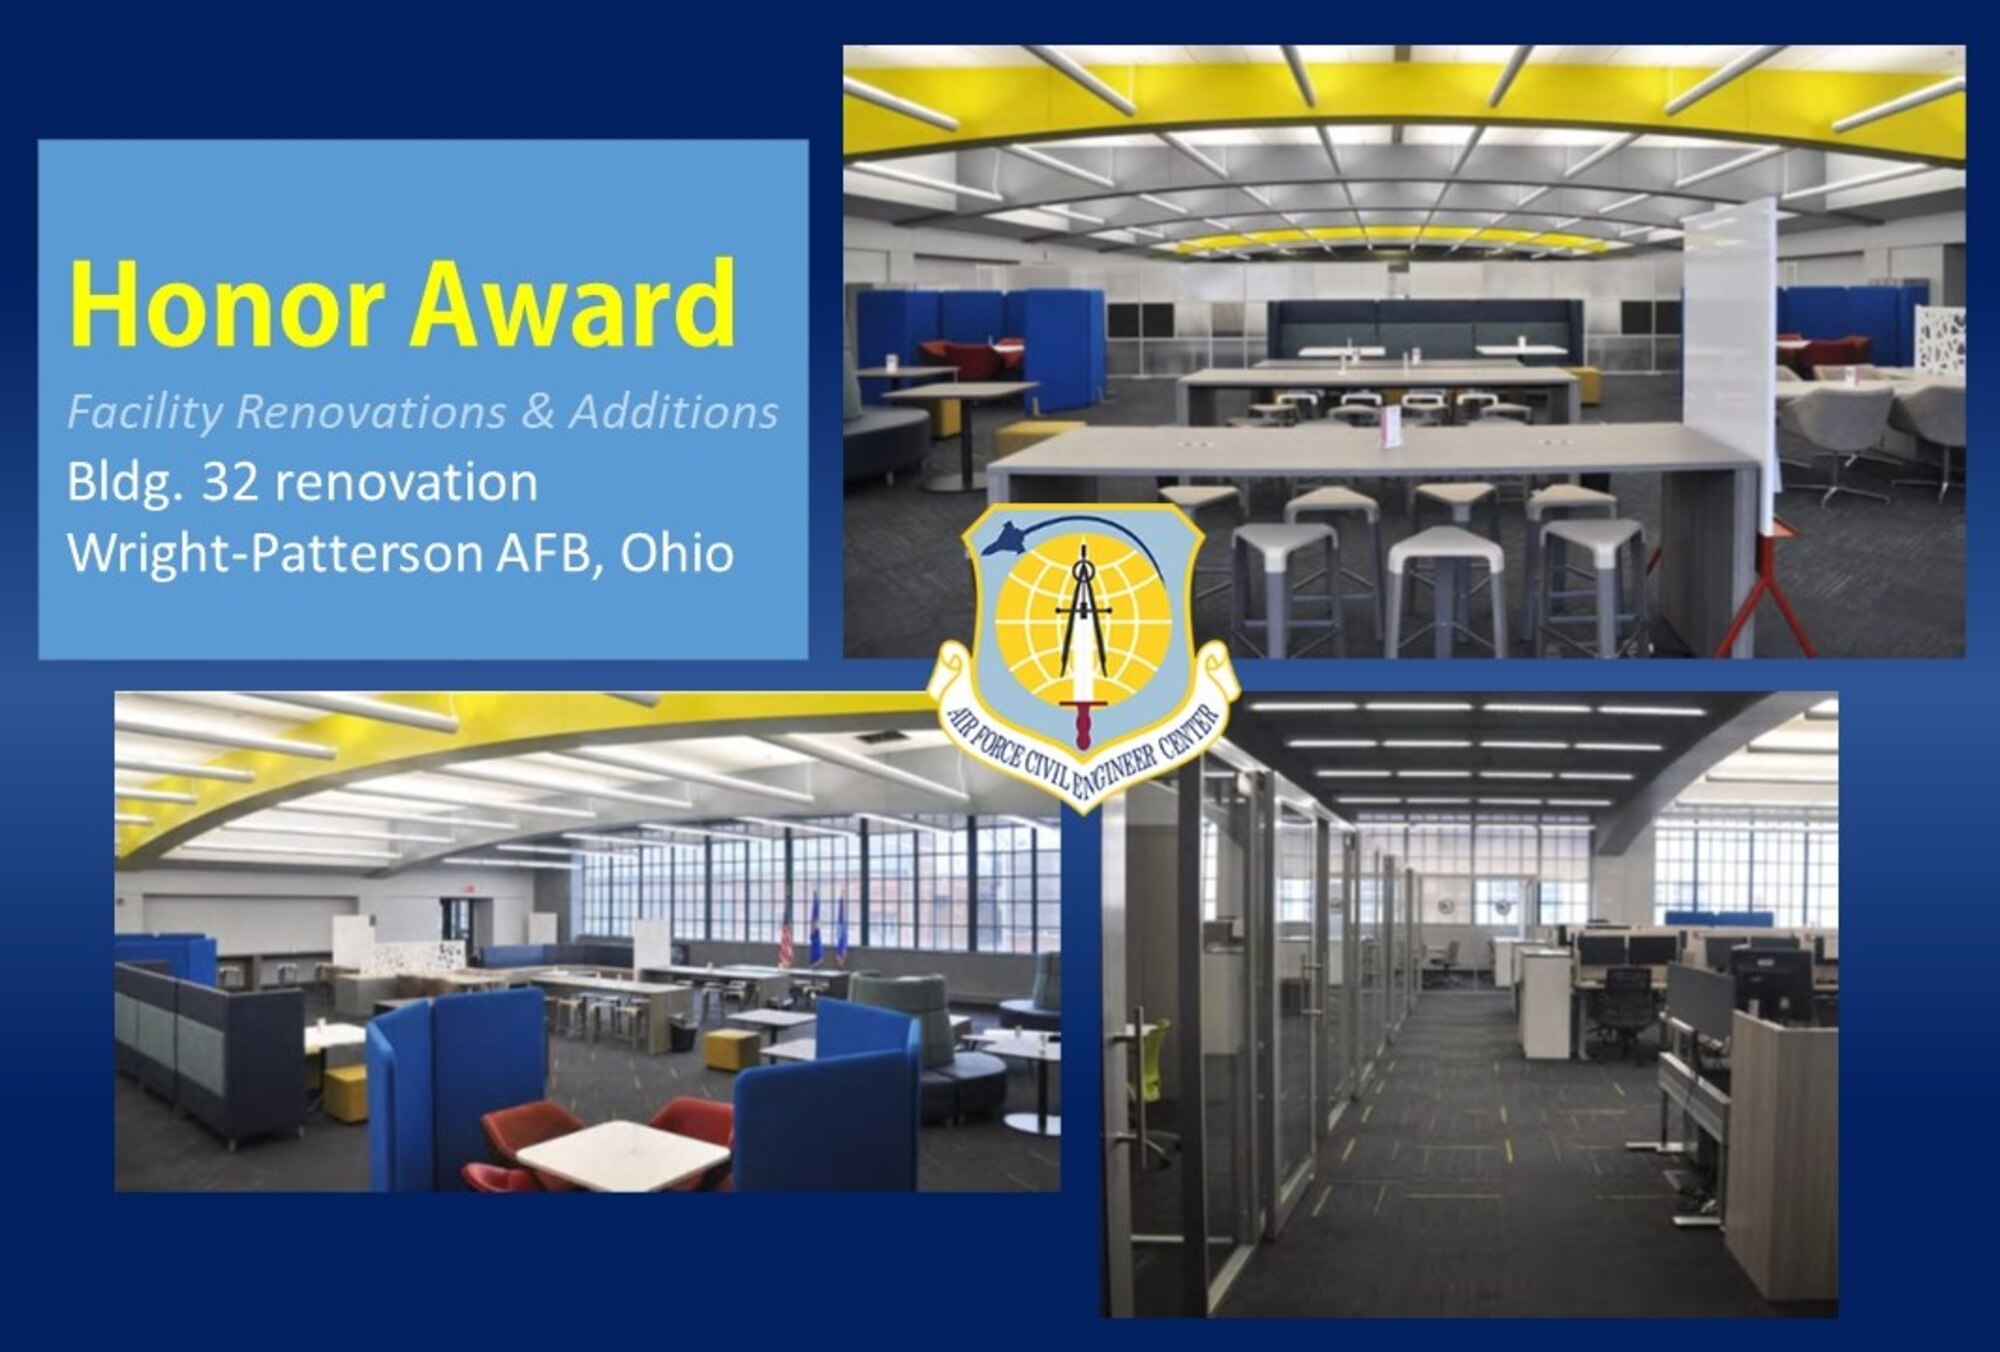 2020 Design Honor Award winner in the Facility Renovations and Additions category is Bldg. 32 renovation at Wright-Patterson AFB, Ohio.